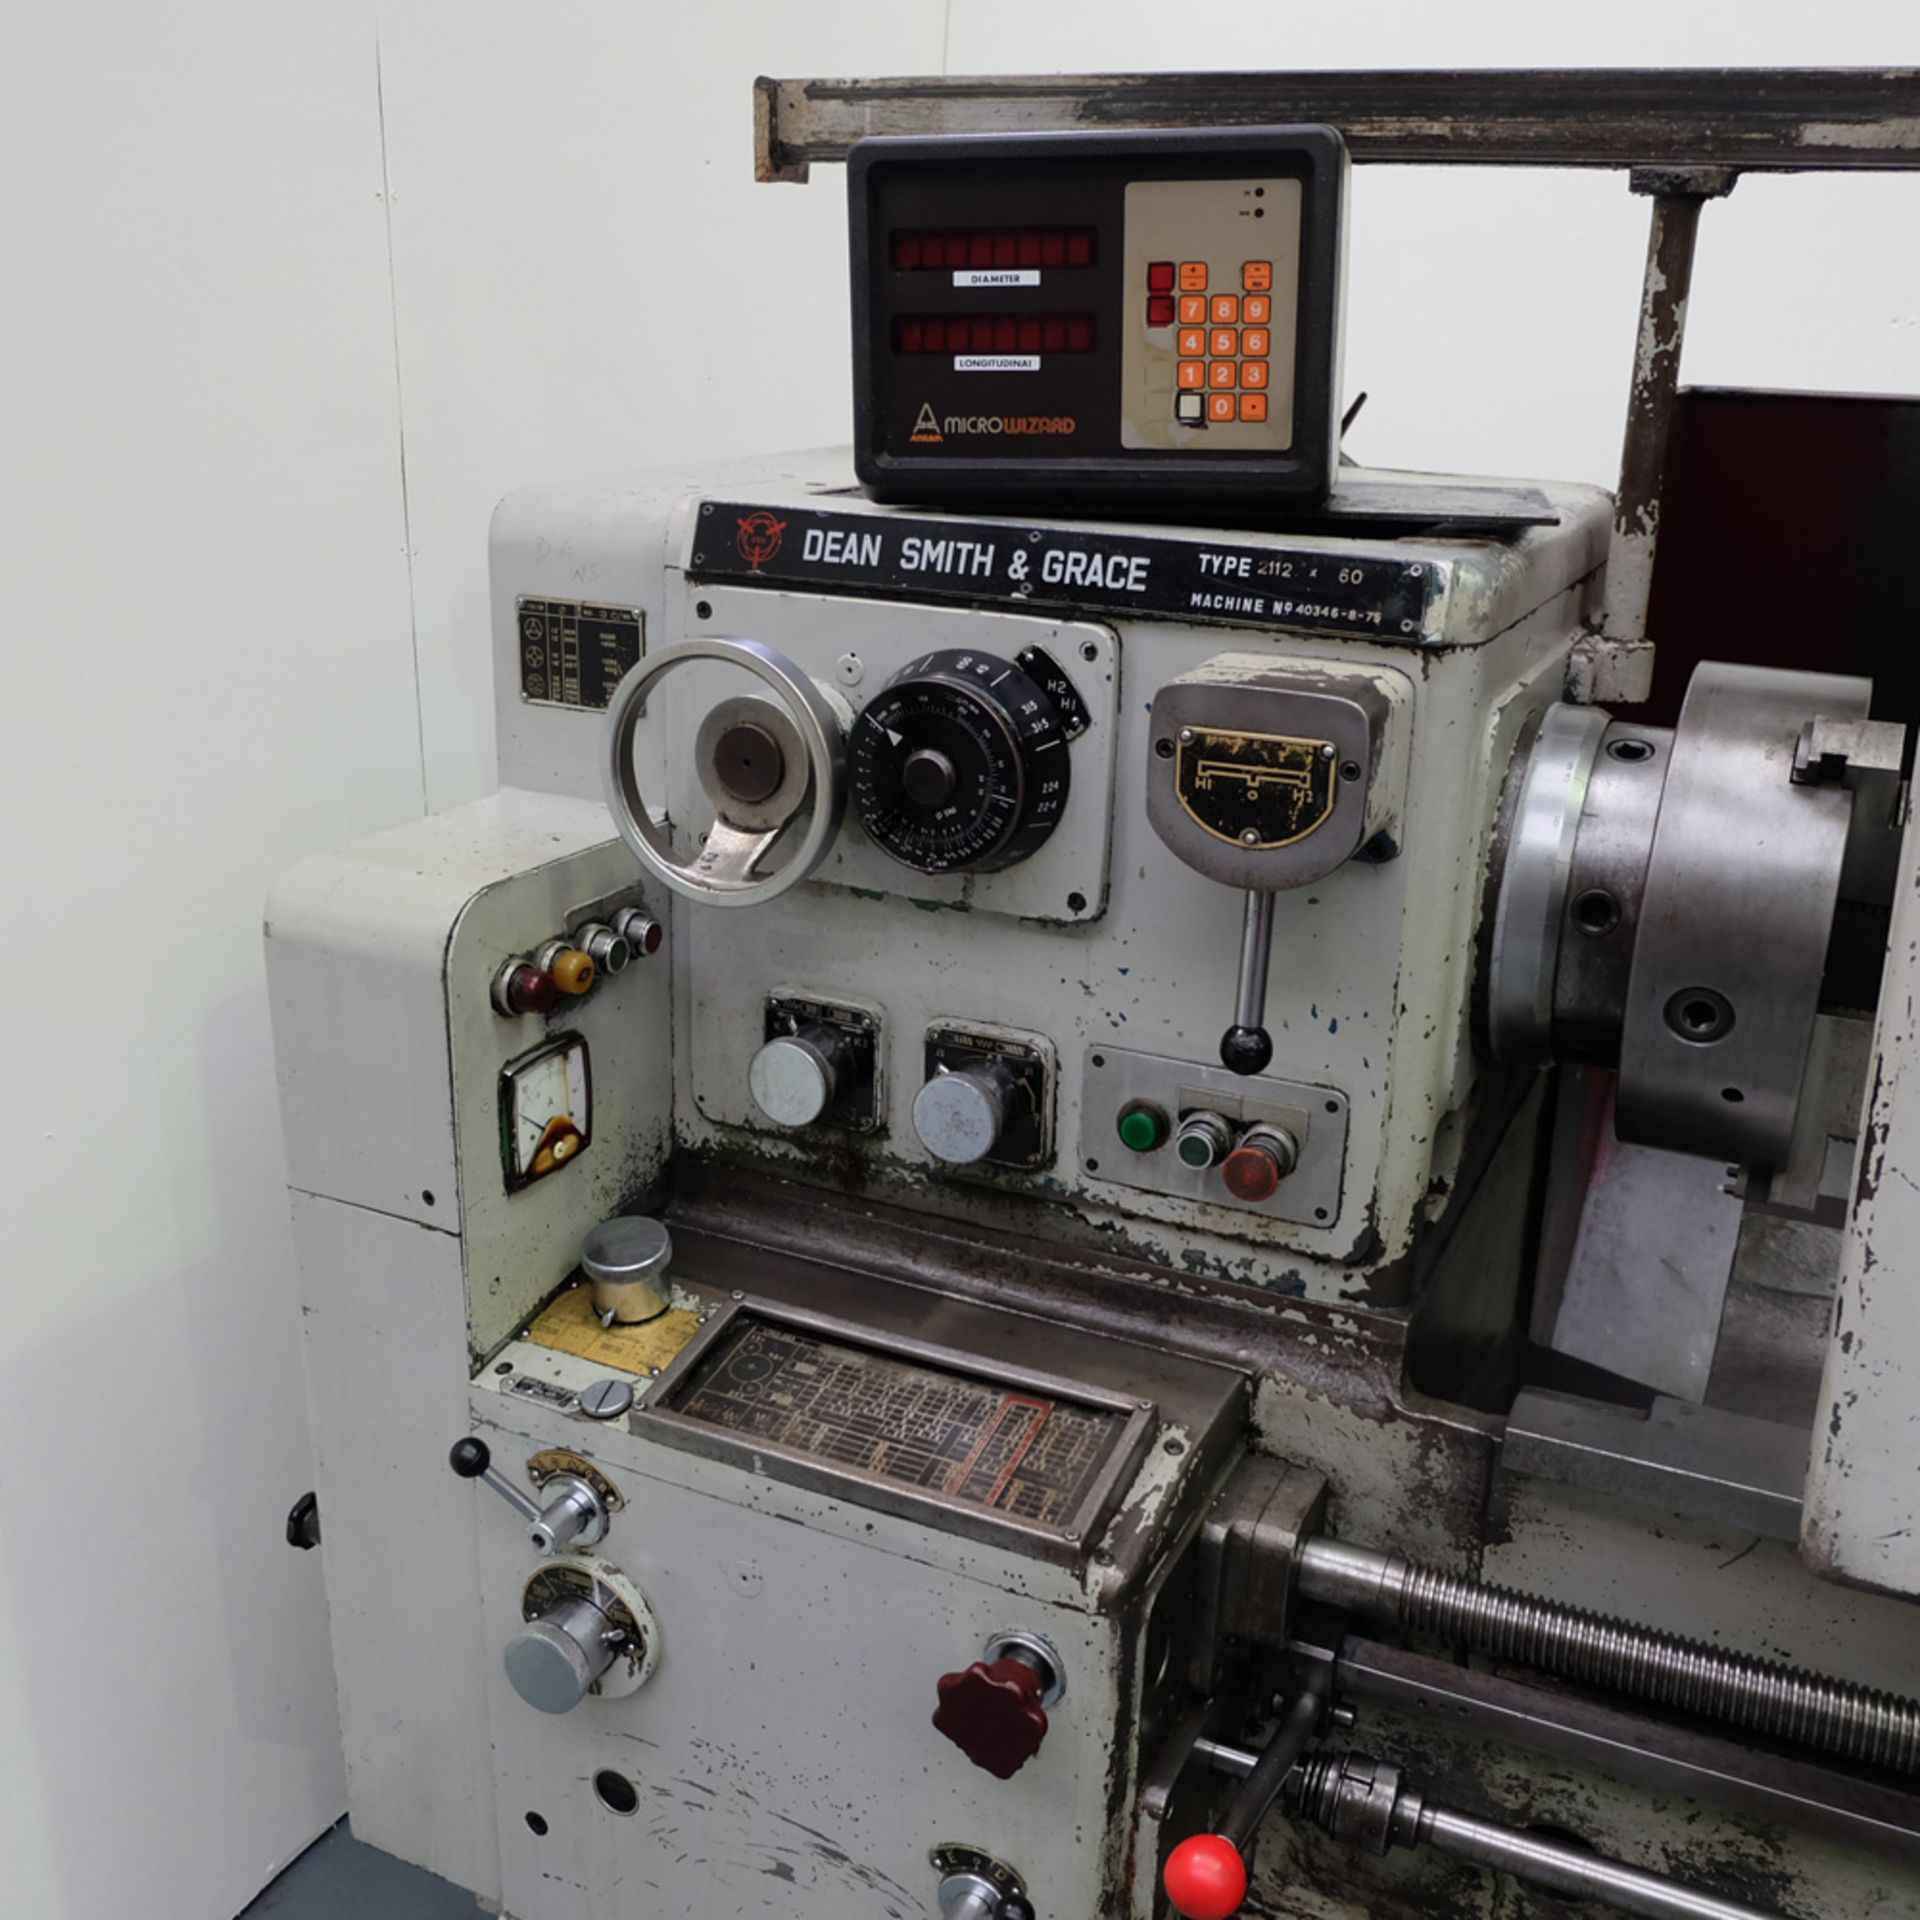 Dean Smith & Grace Type 2112 x 60. Straight Bed Centre Lathe. Distance Between Centres 60". - Image 3 of 13